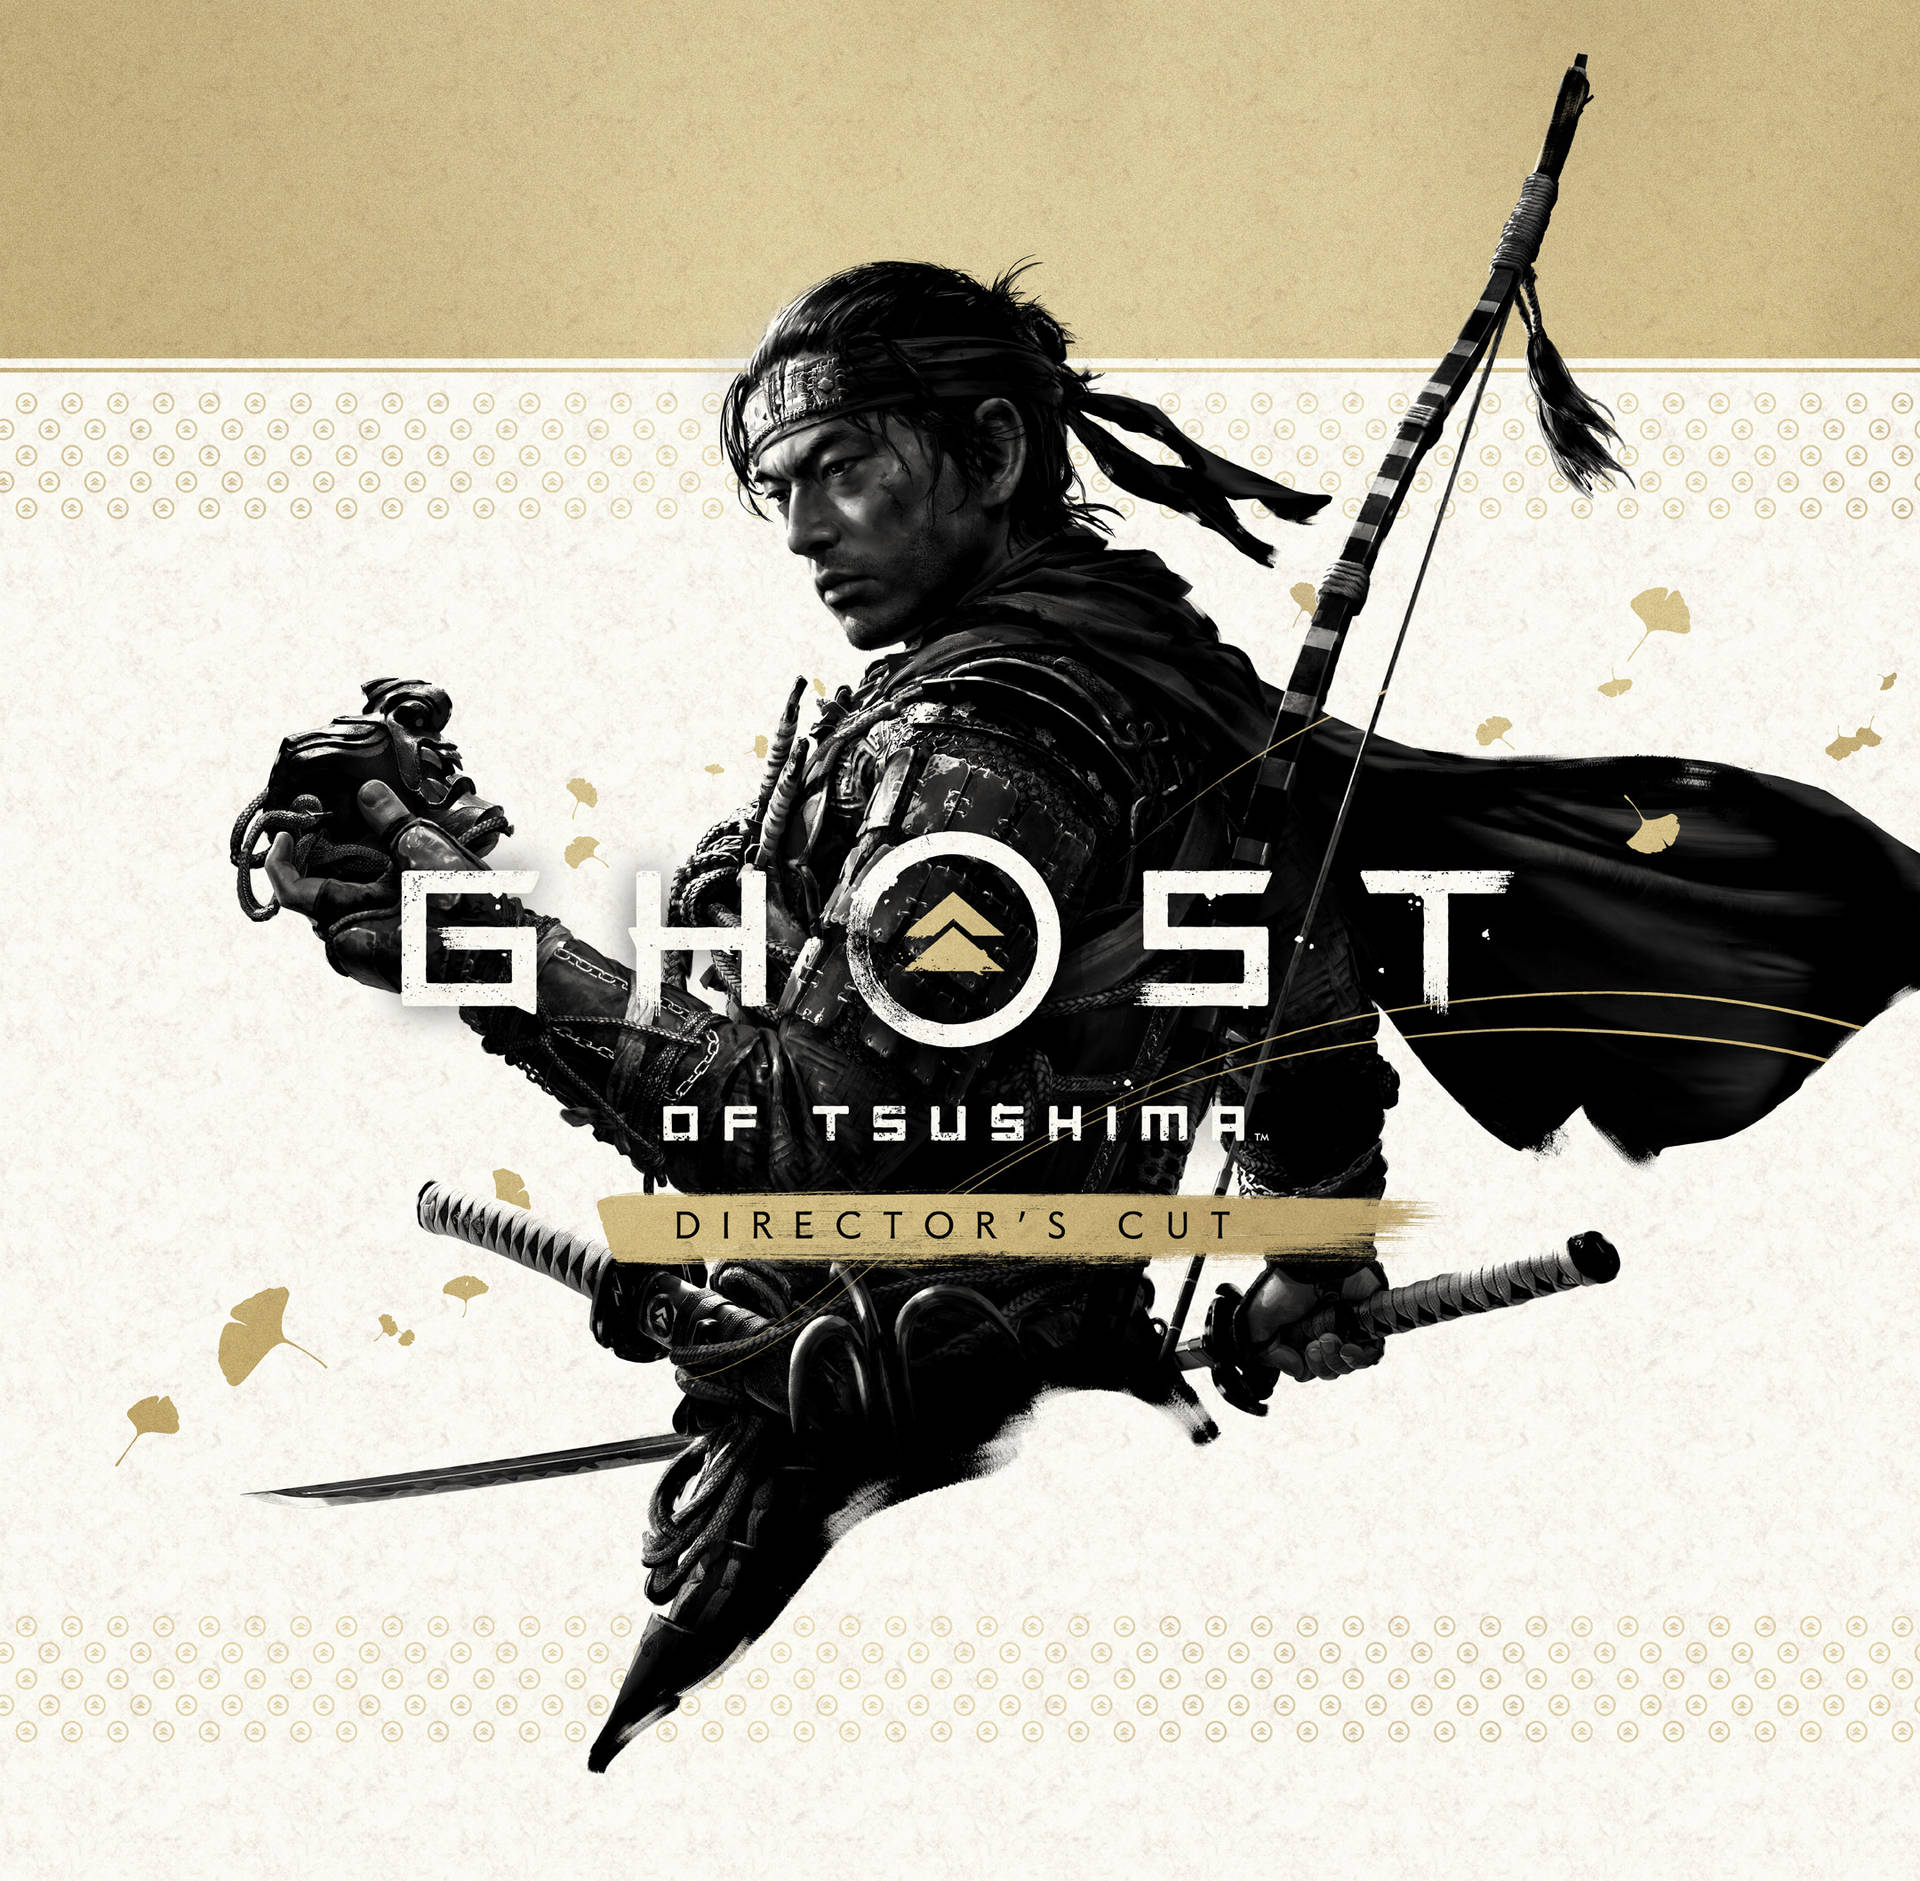 100+] Ghost Of Tsushima Wallpapers 